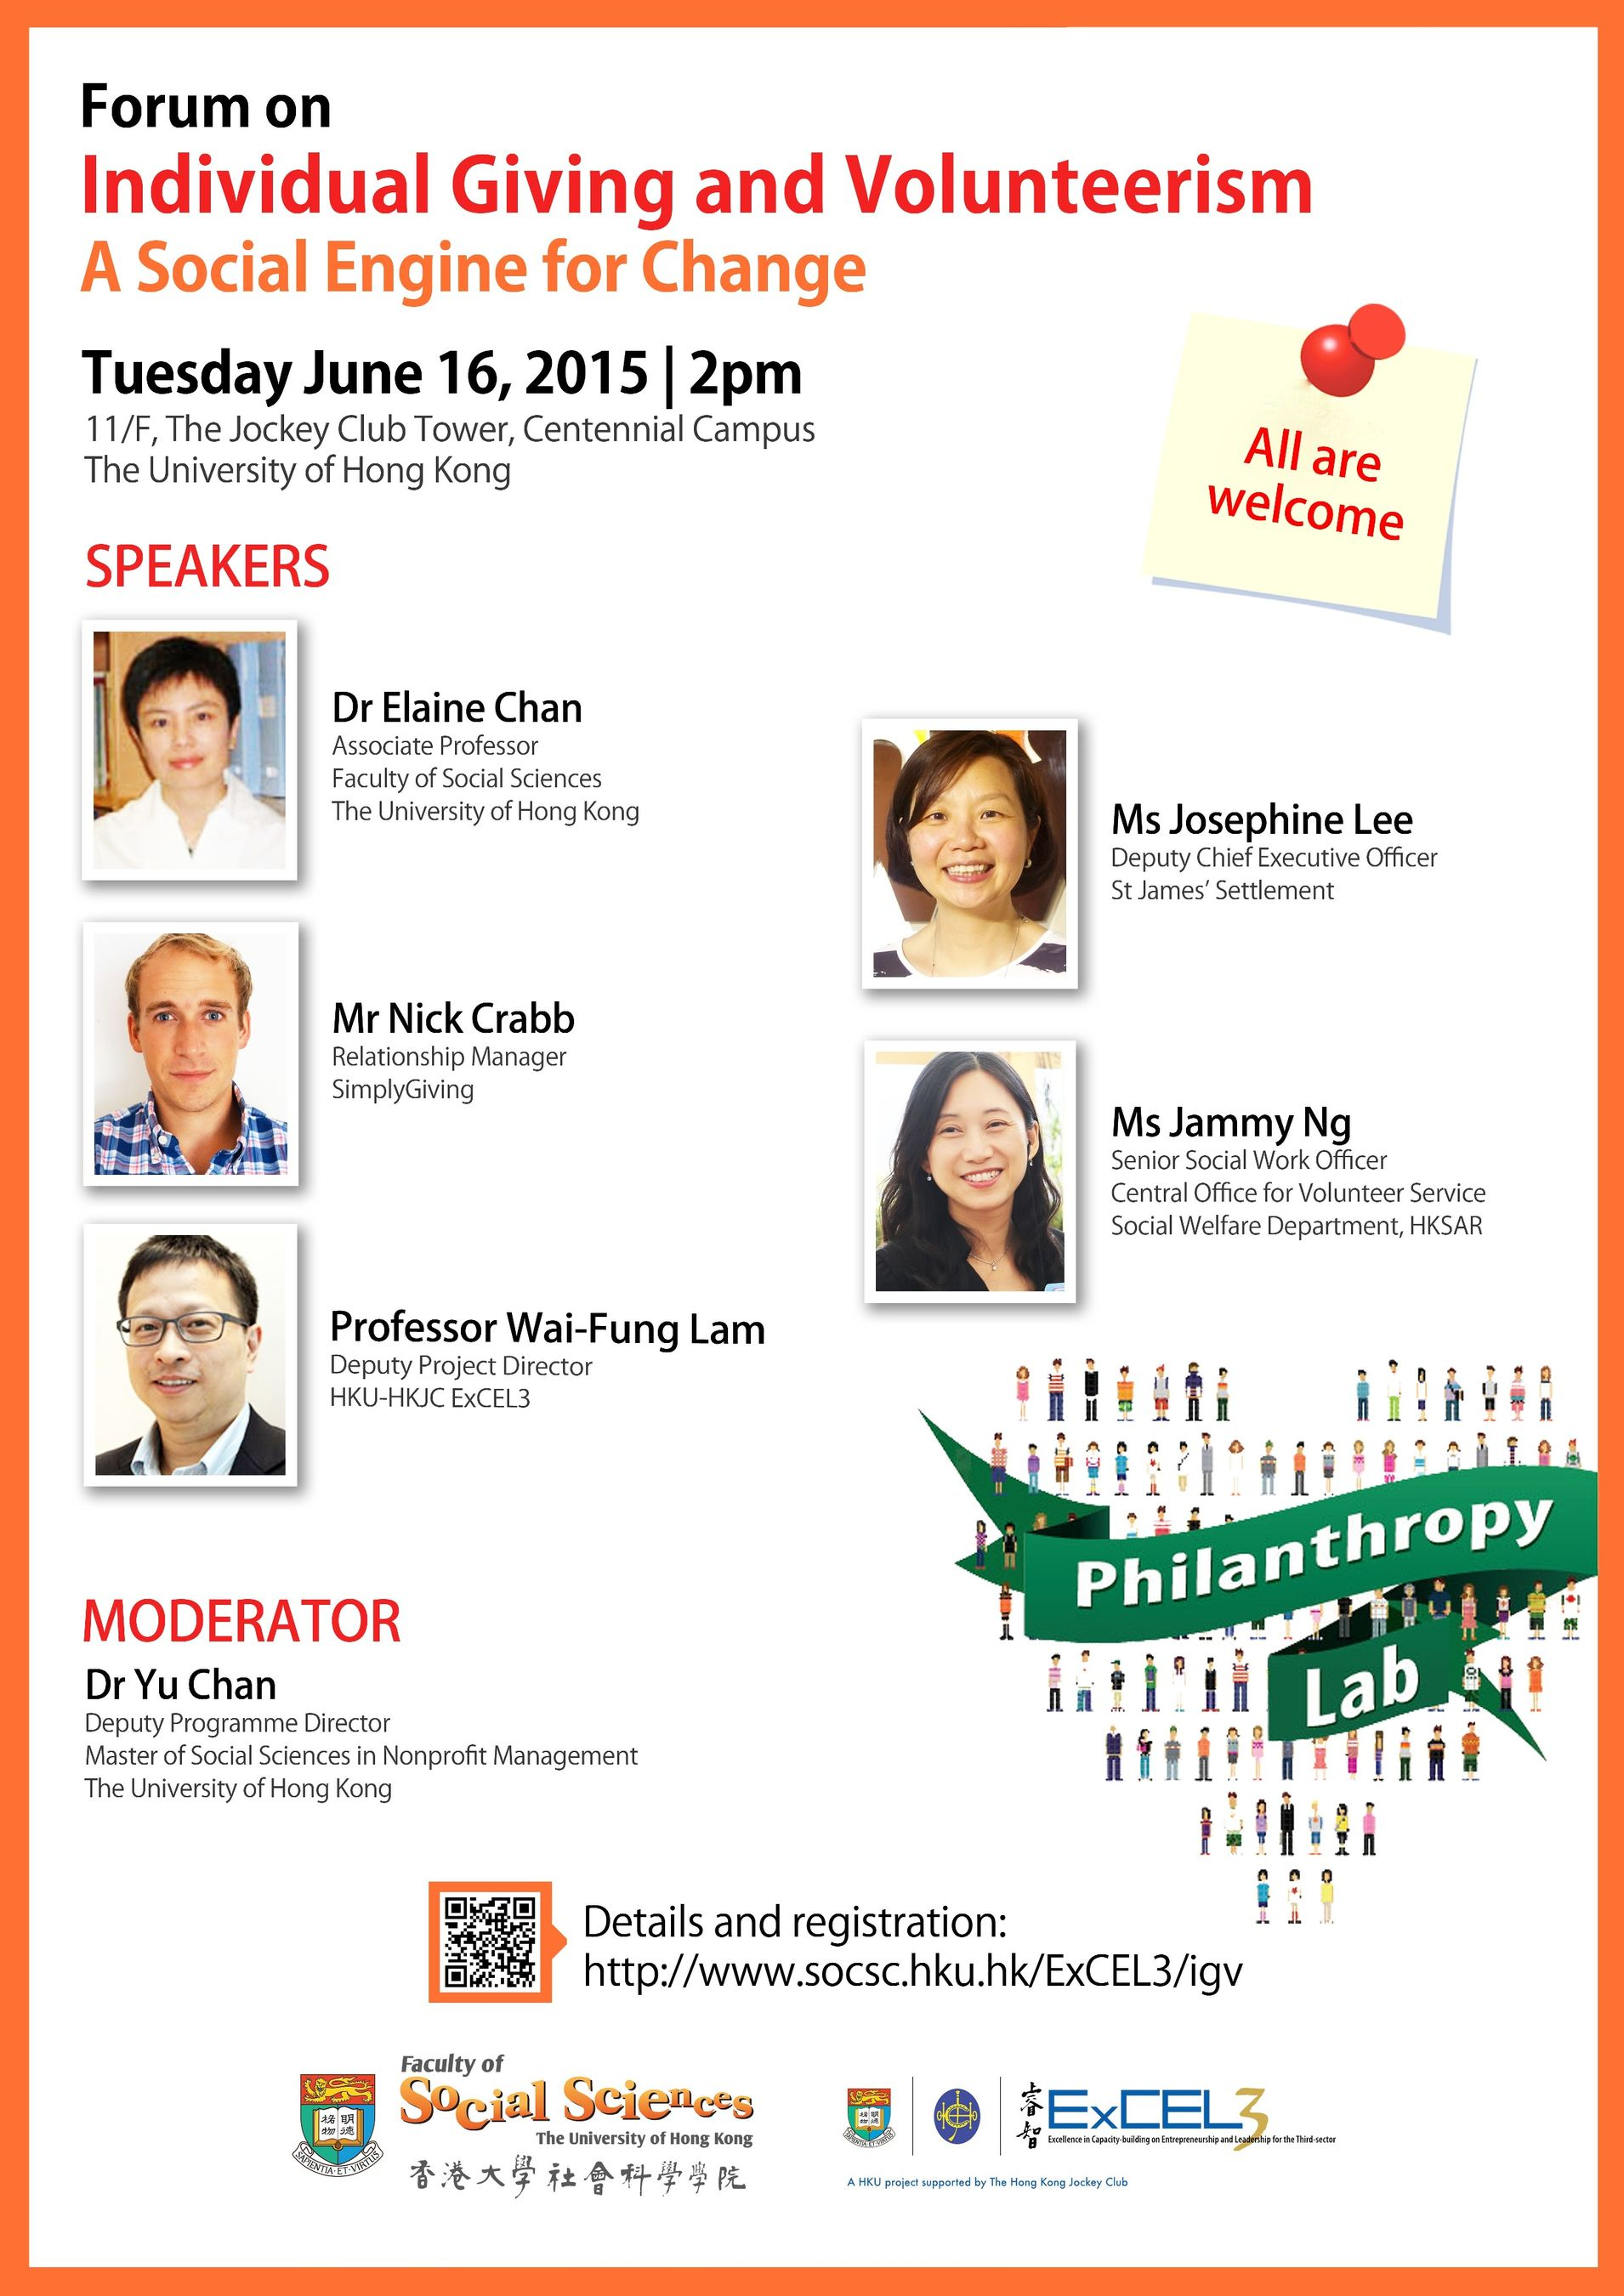 Forum on Individual Giving and Volunteerism: A Social Engine for Change